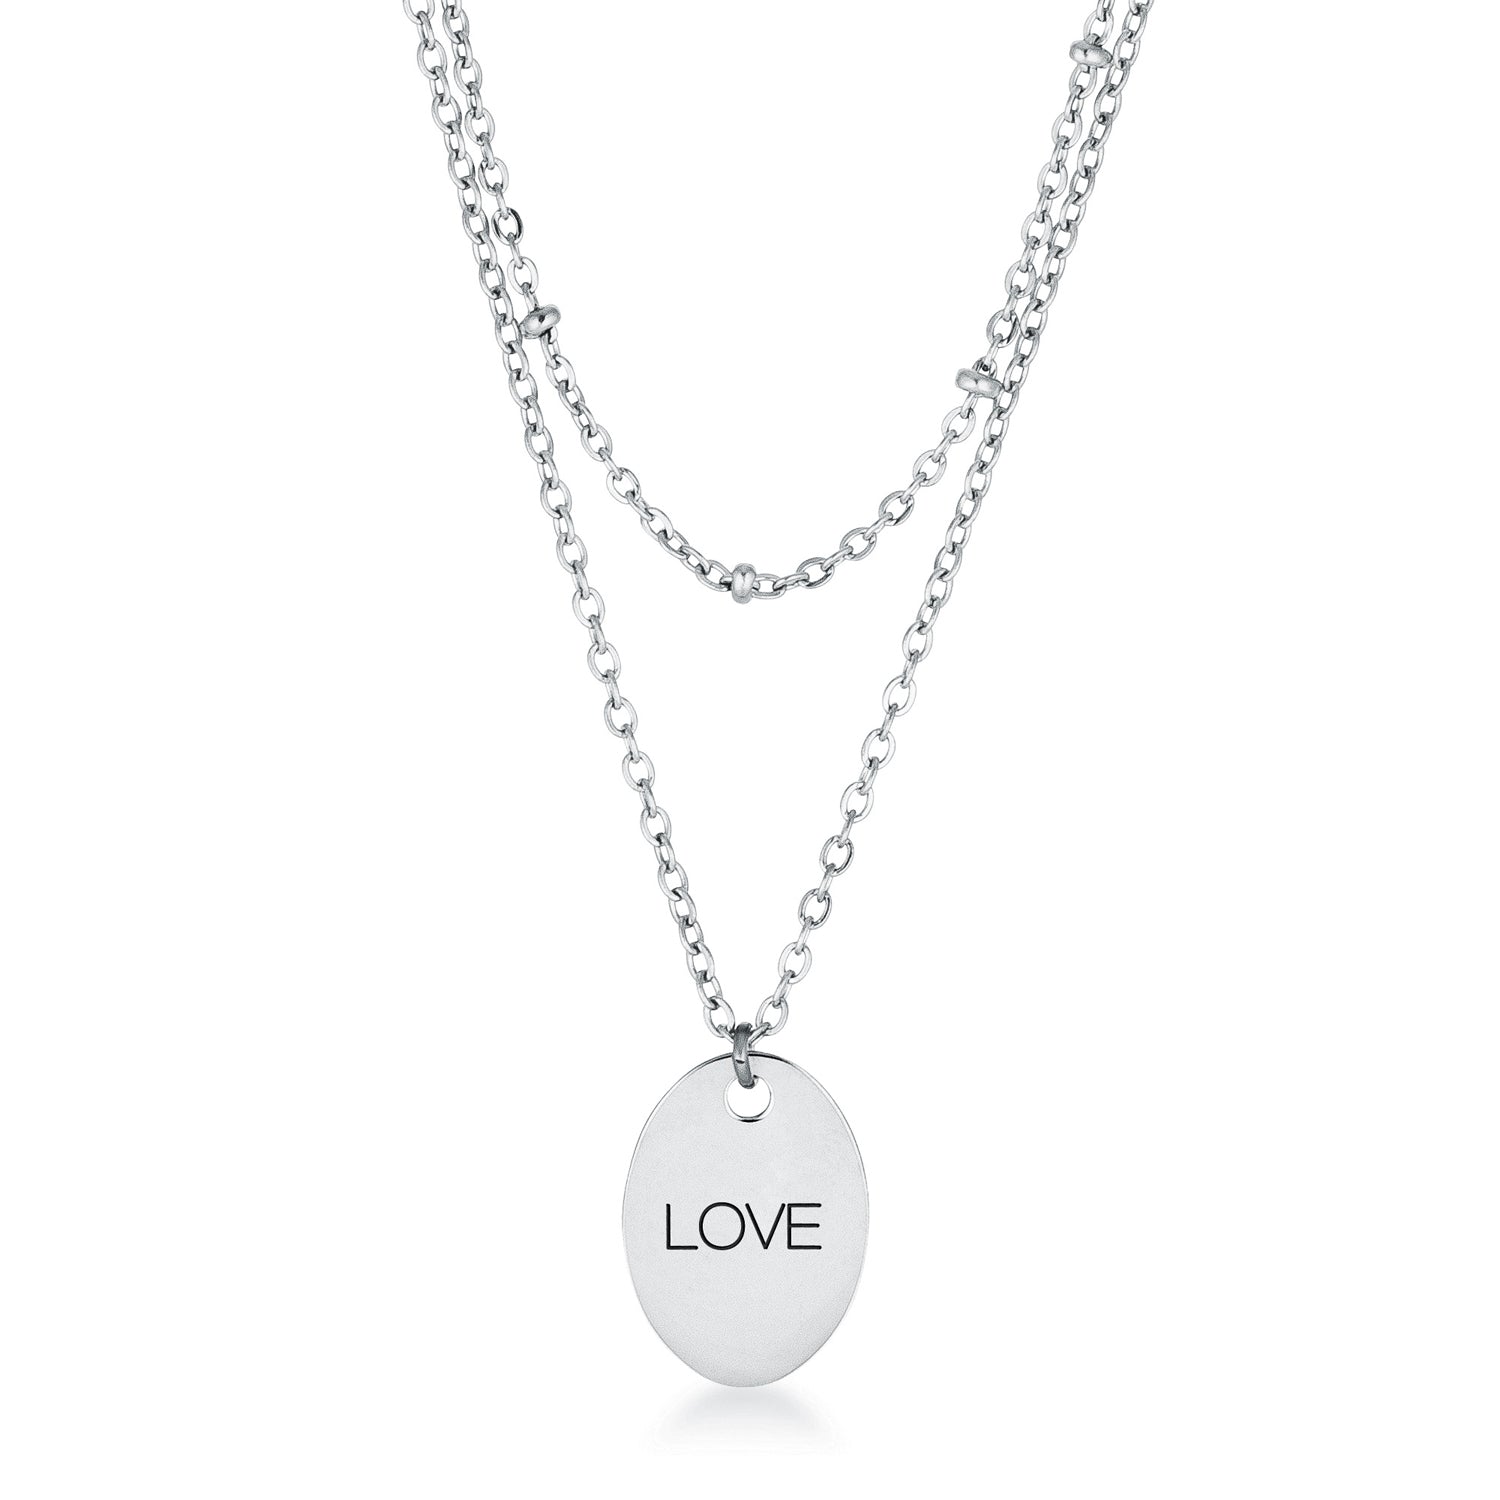 Stainless Steel Double Chain LOVE Necklace